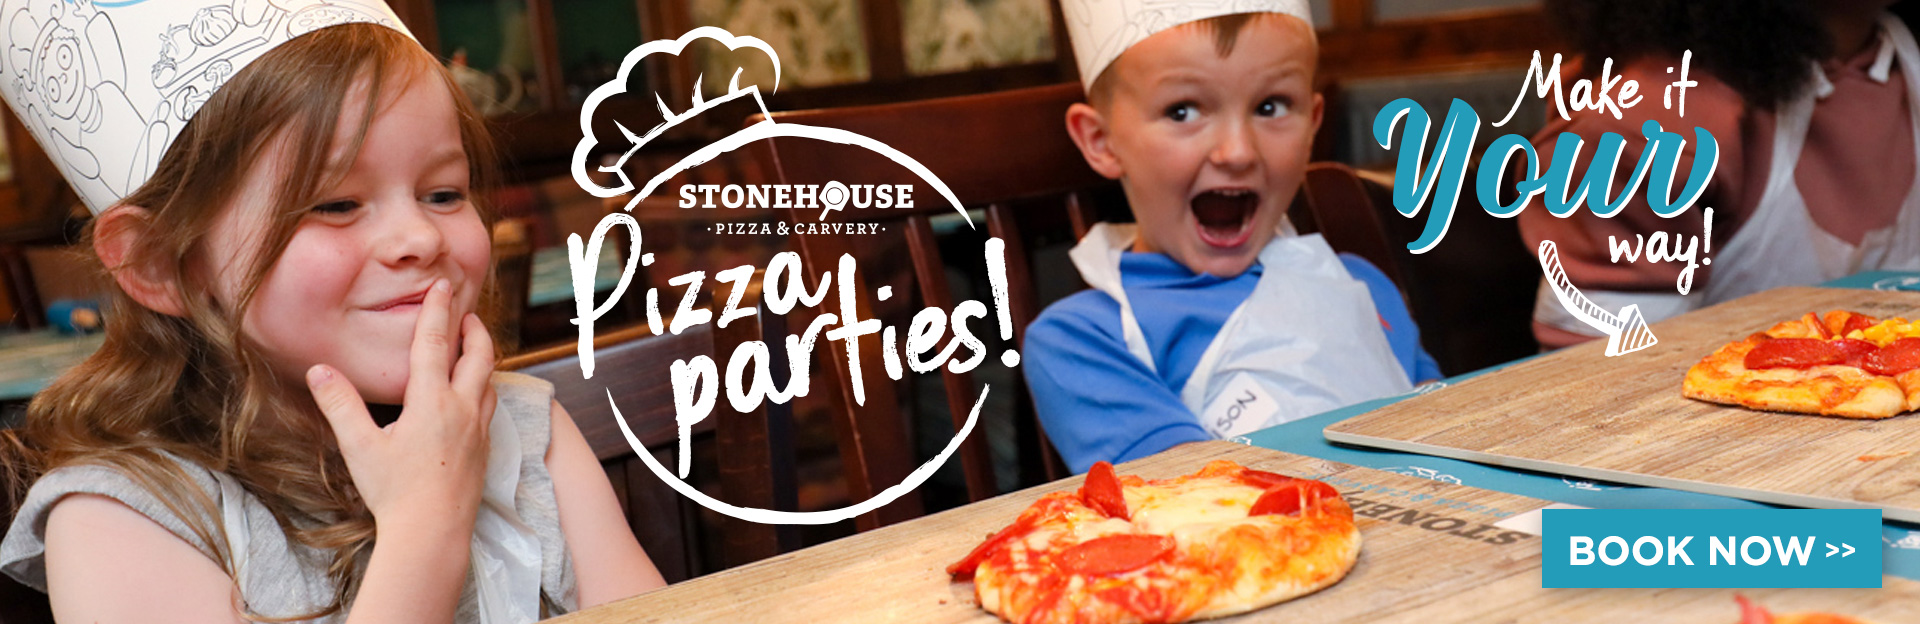 Pizza Parties at Stonehouse Pizza Carvery